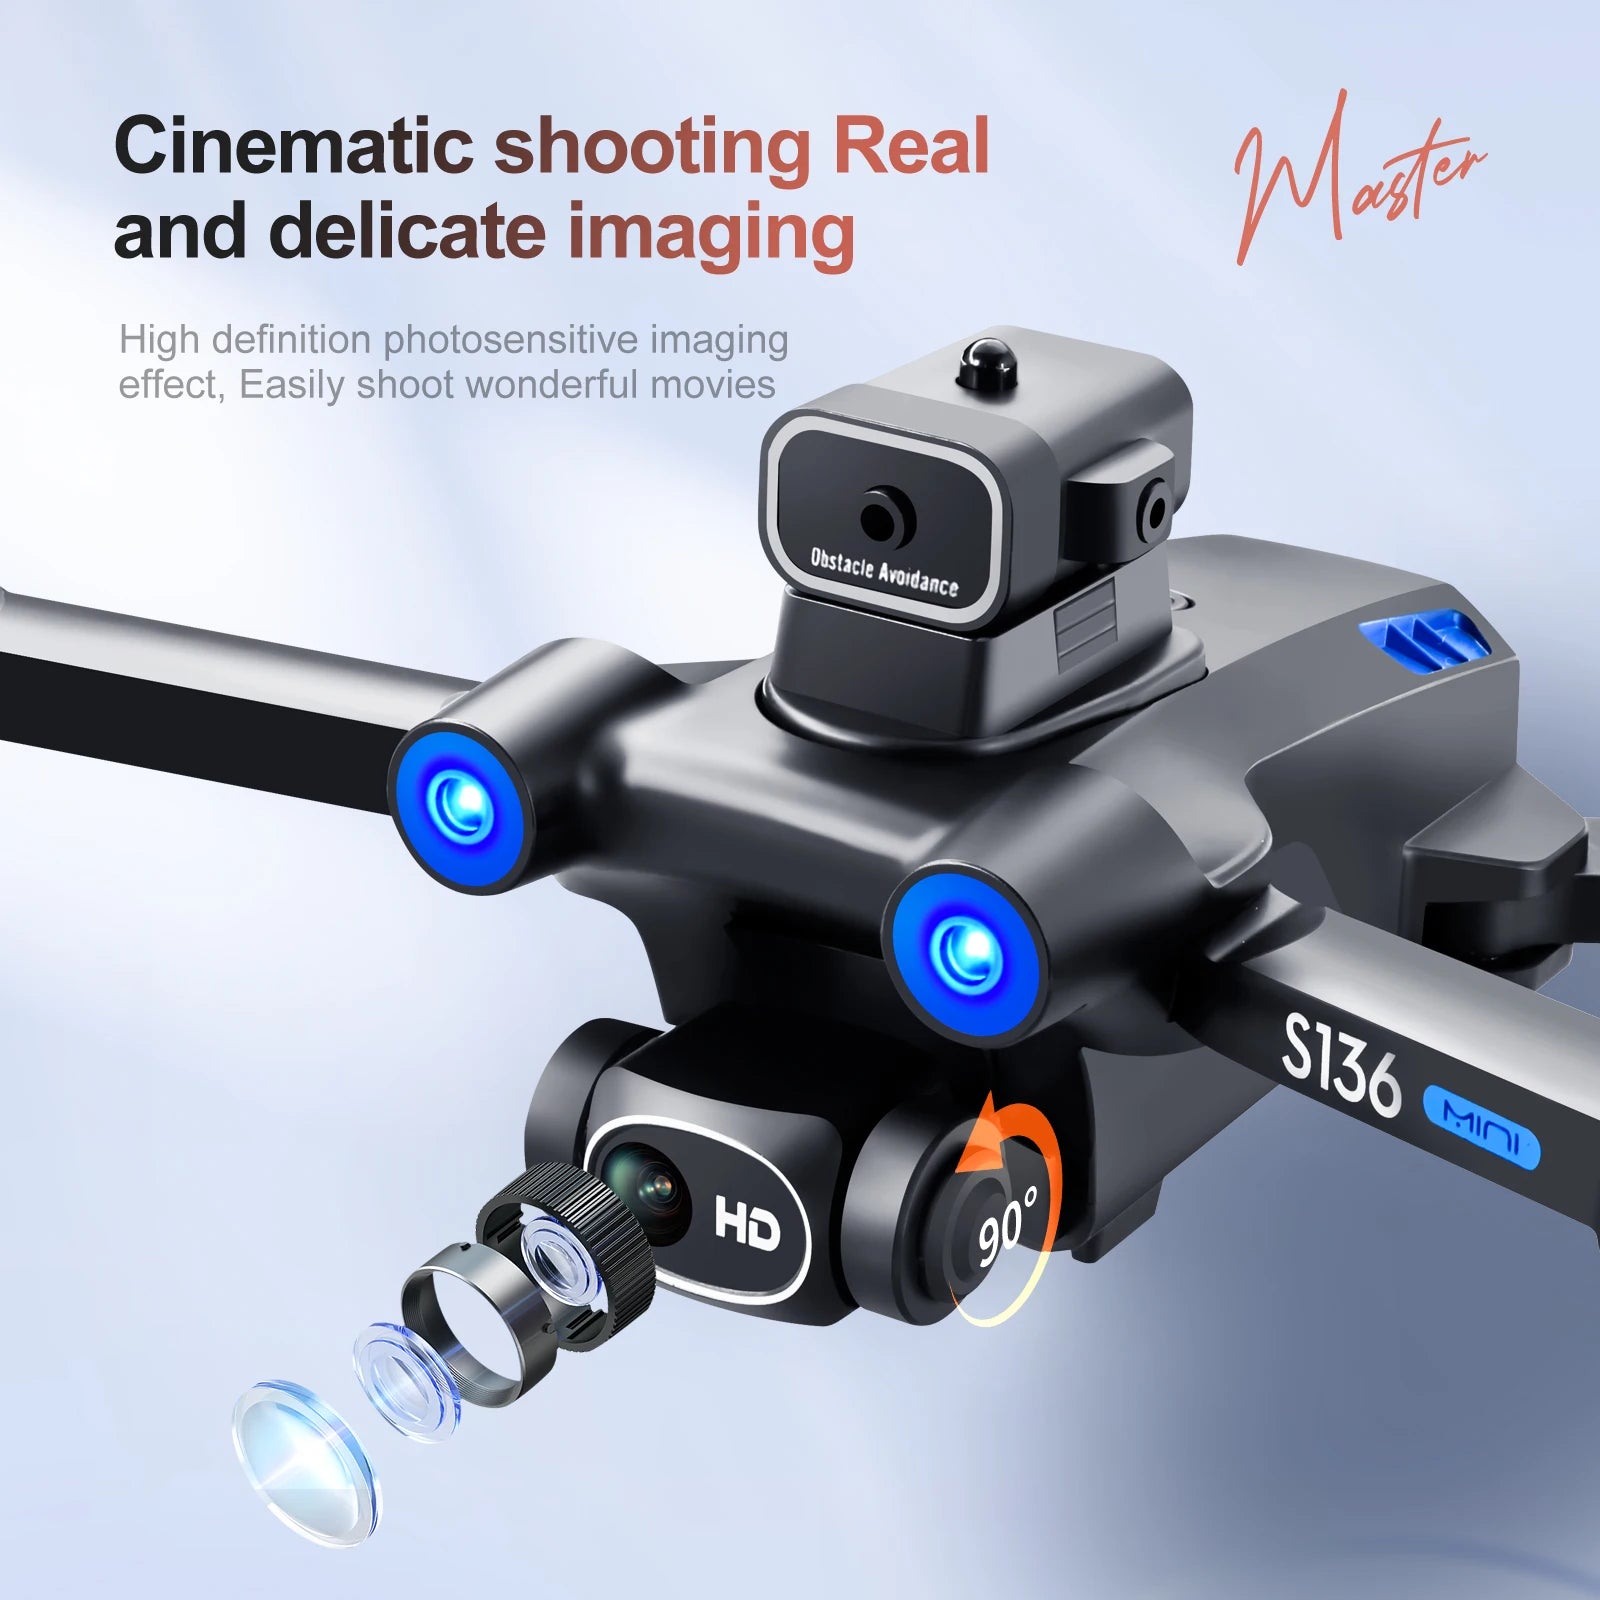 S136 GPS Drone, Cinematic shooting Real Madir and delicate imaging effect; Easily shoot wonderful movies Hd 90